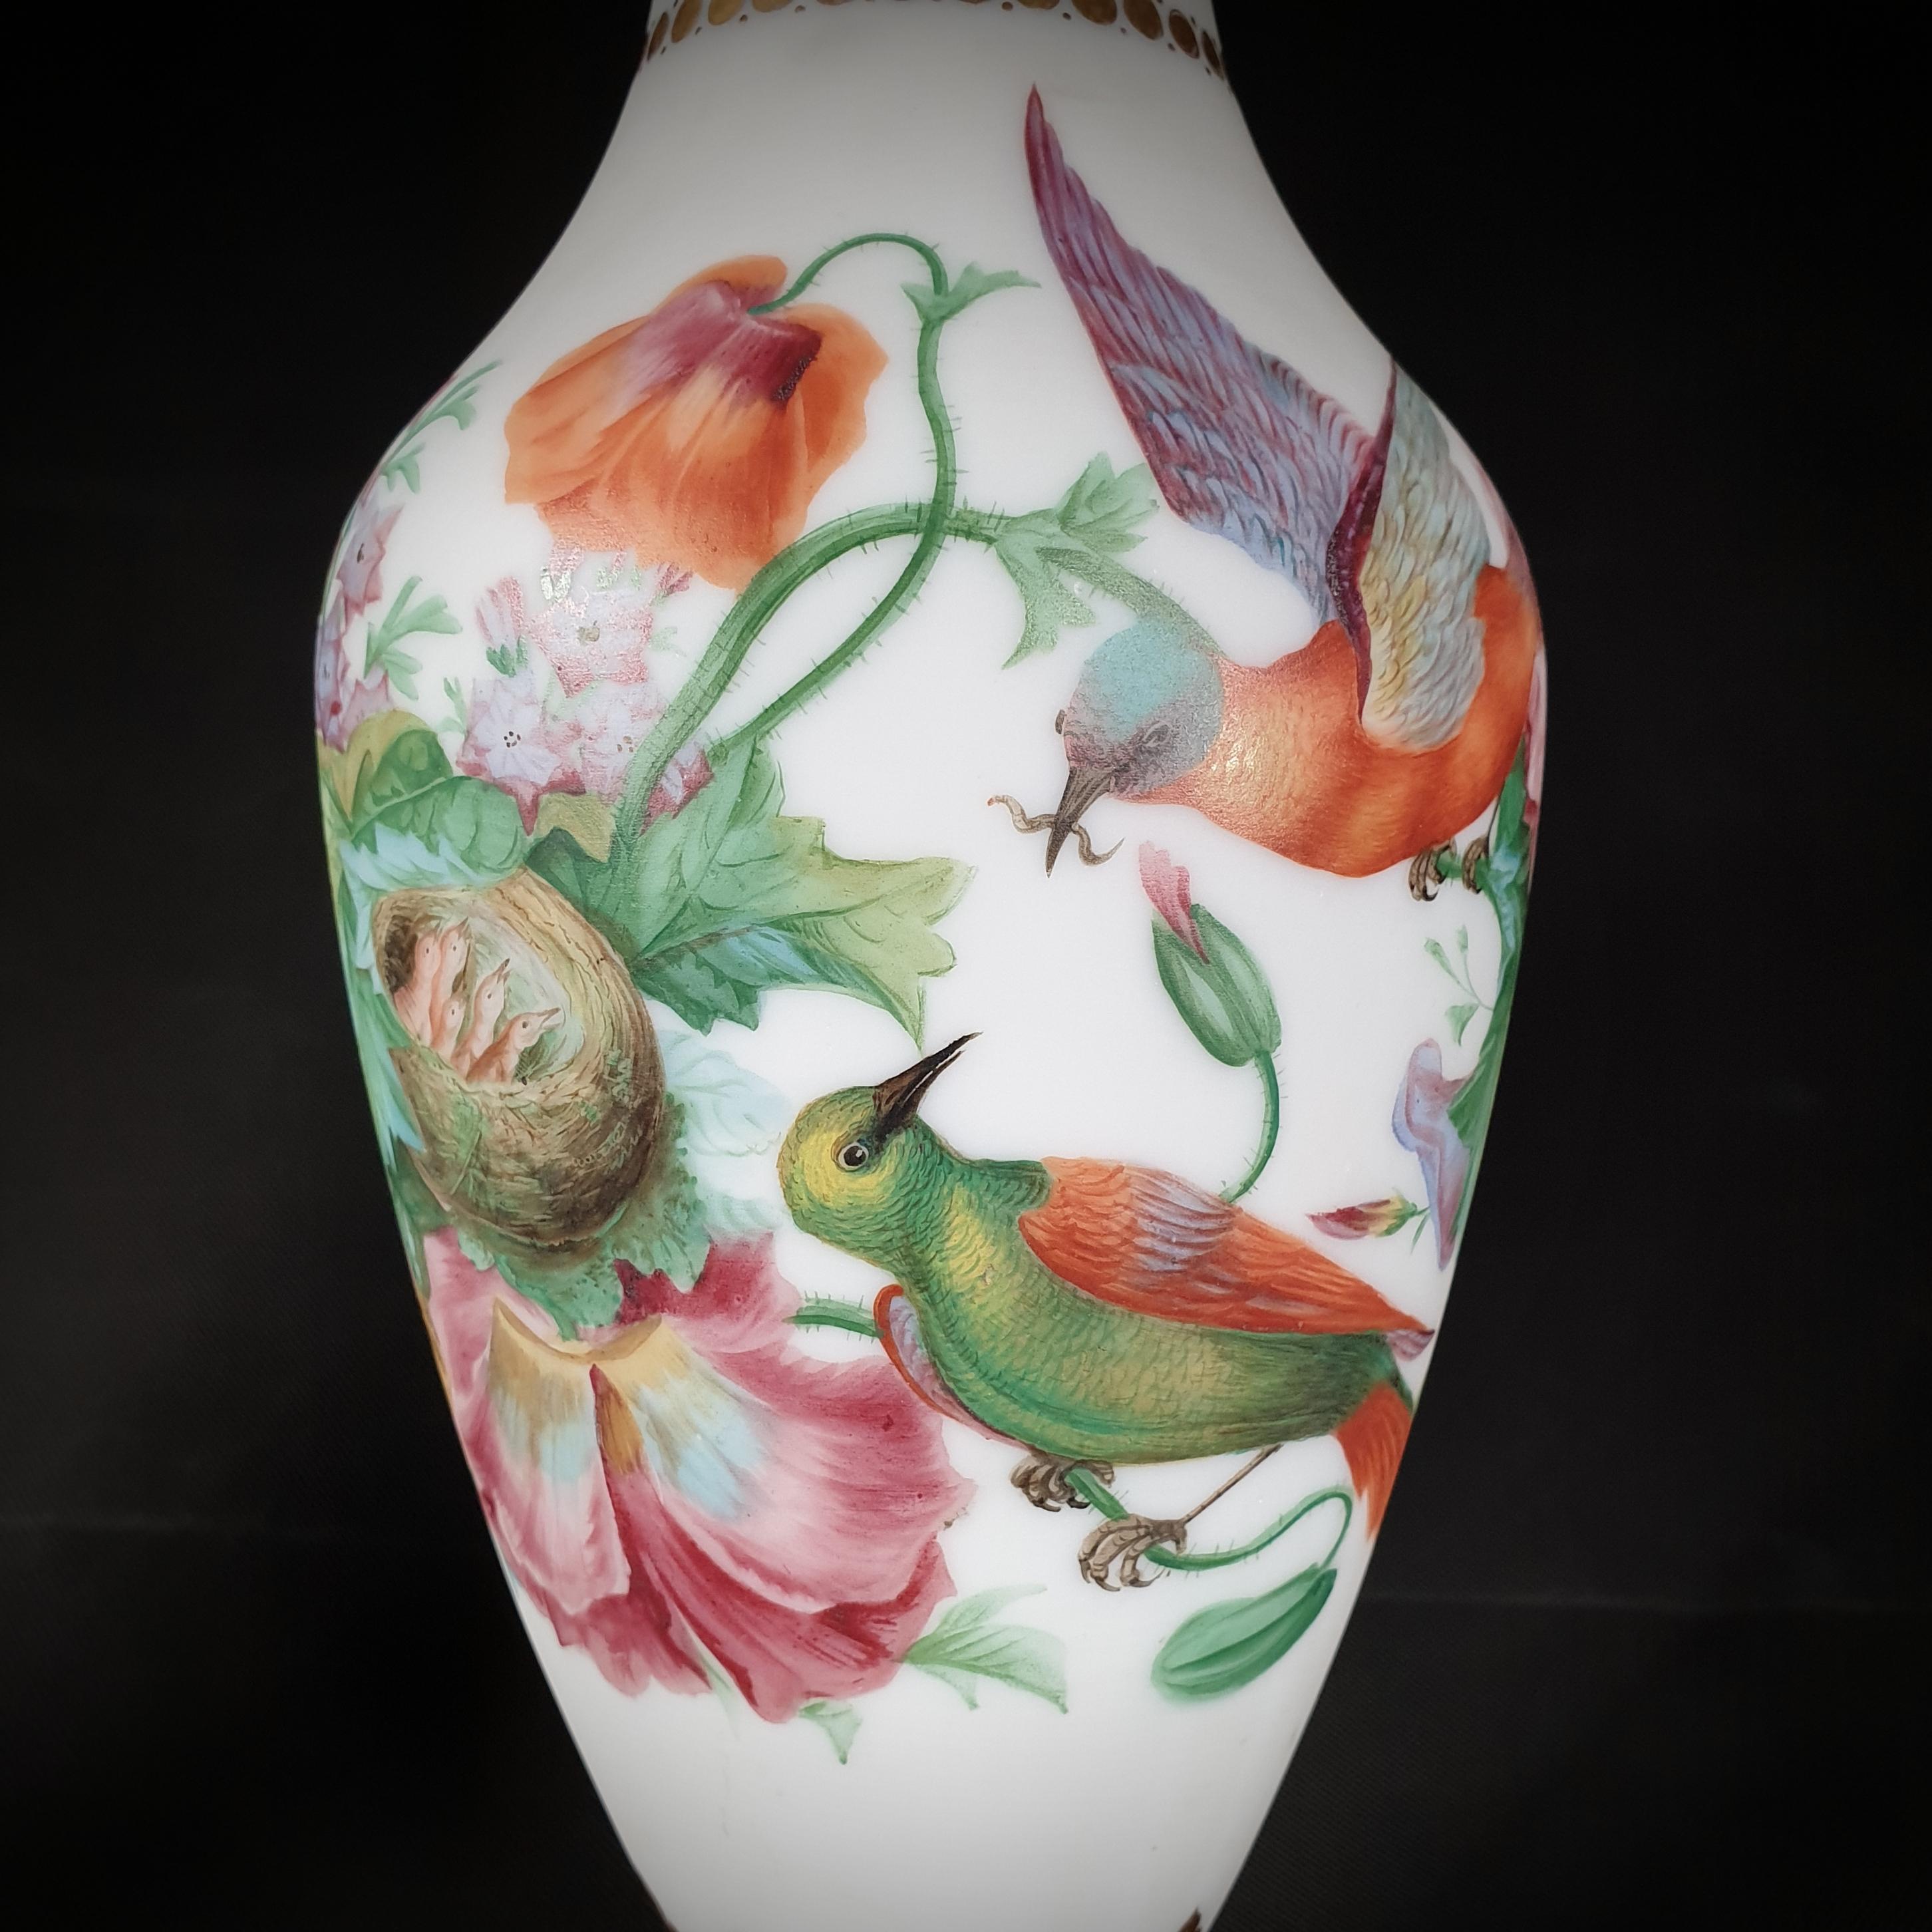 Late Victorian Pair of Opaque Opaline Glass Vases Hand-Painted with Birds and Flowers Late 19th For Sale